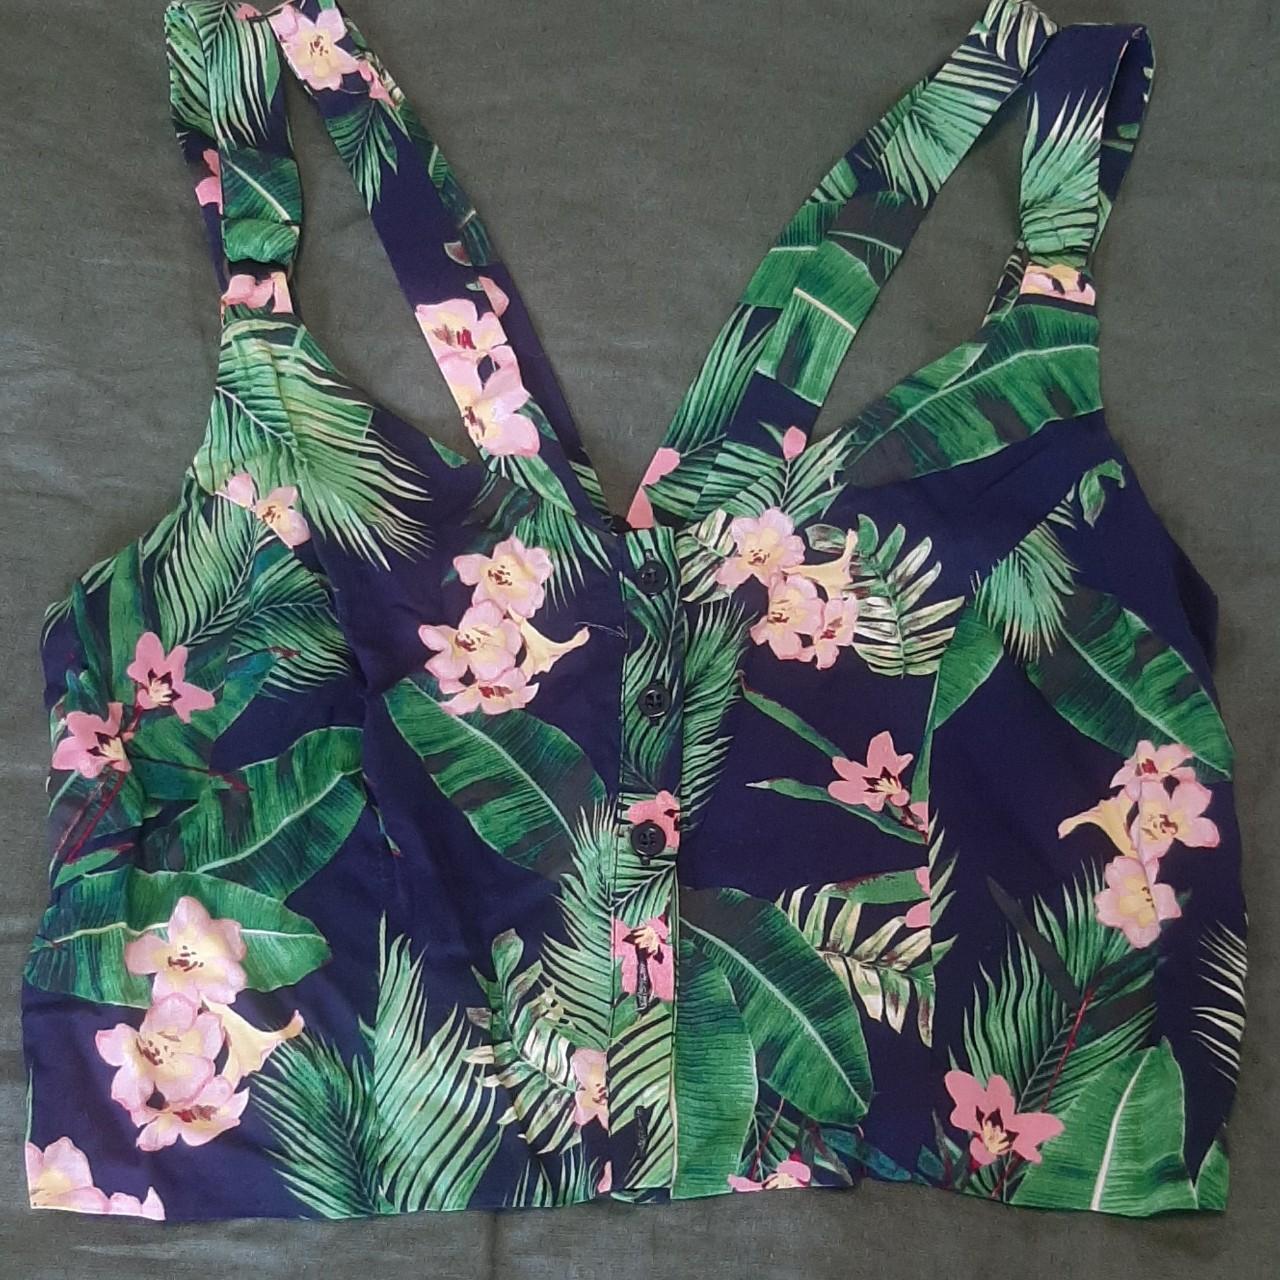 Botanical crop top Button up with ring detail on... - Depop